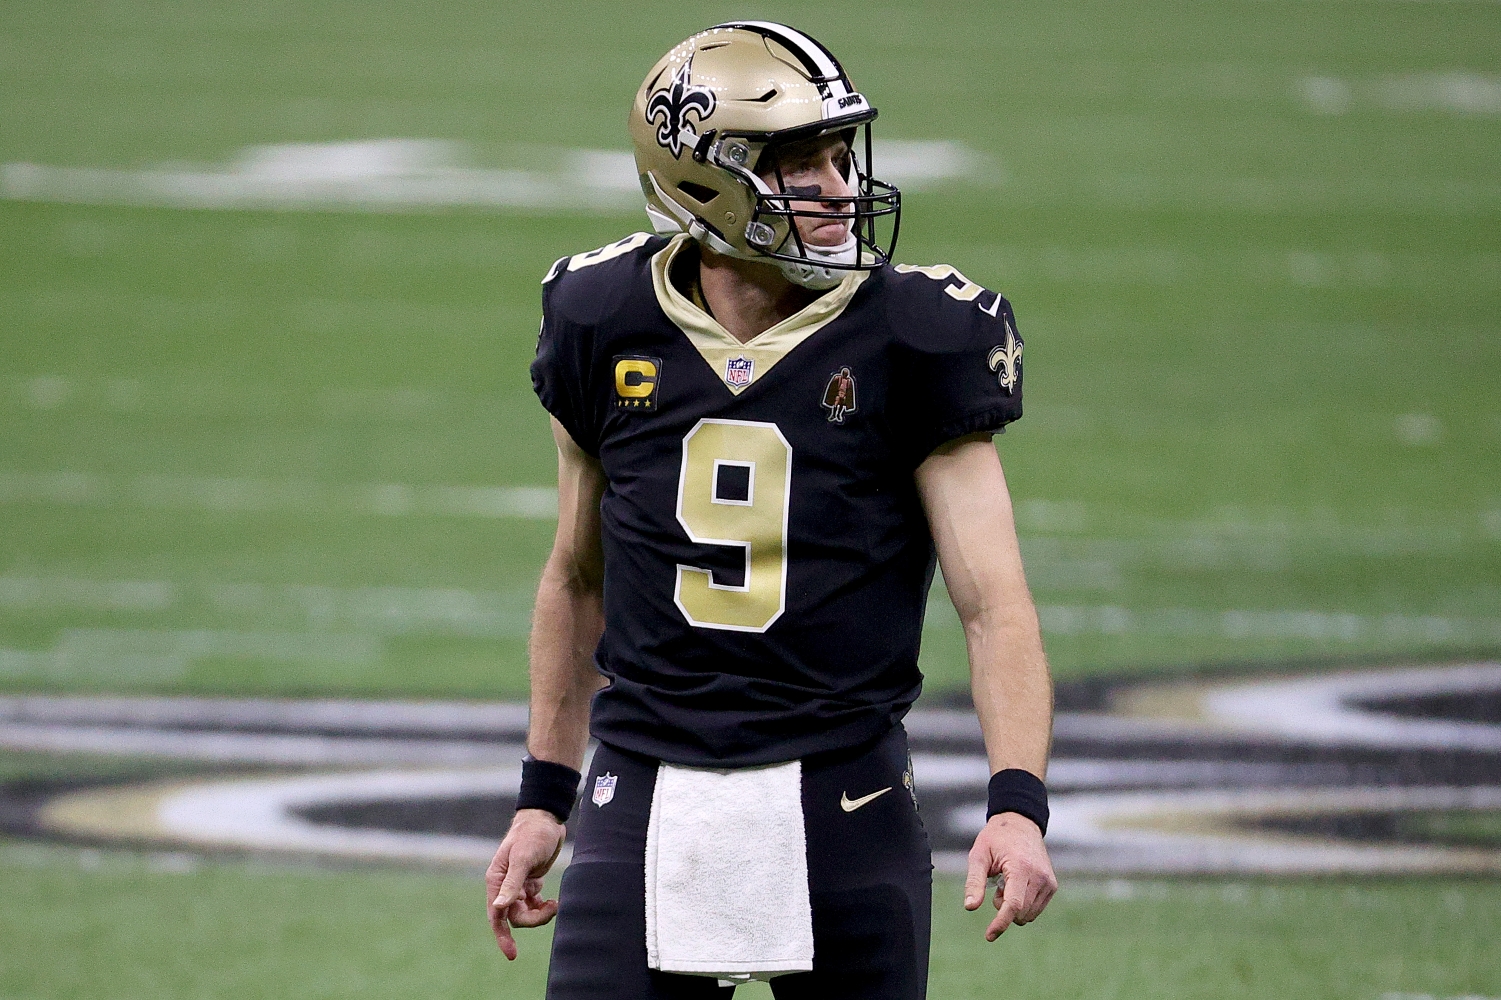 New Orleans Saints quarterback Drew Brees reacts during a play against the Chicago Bears.